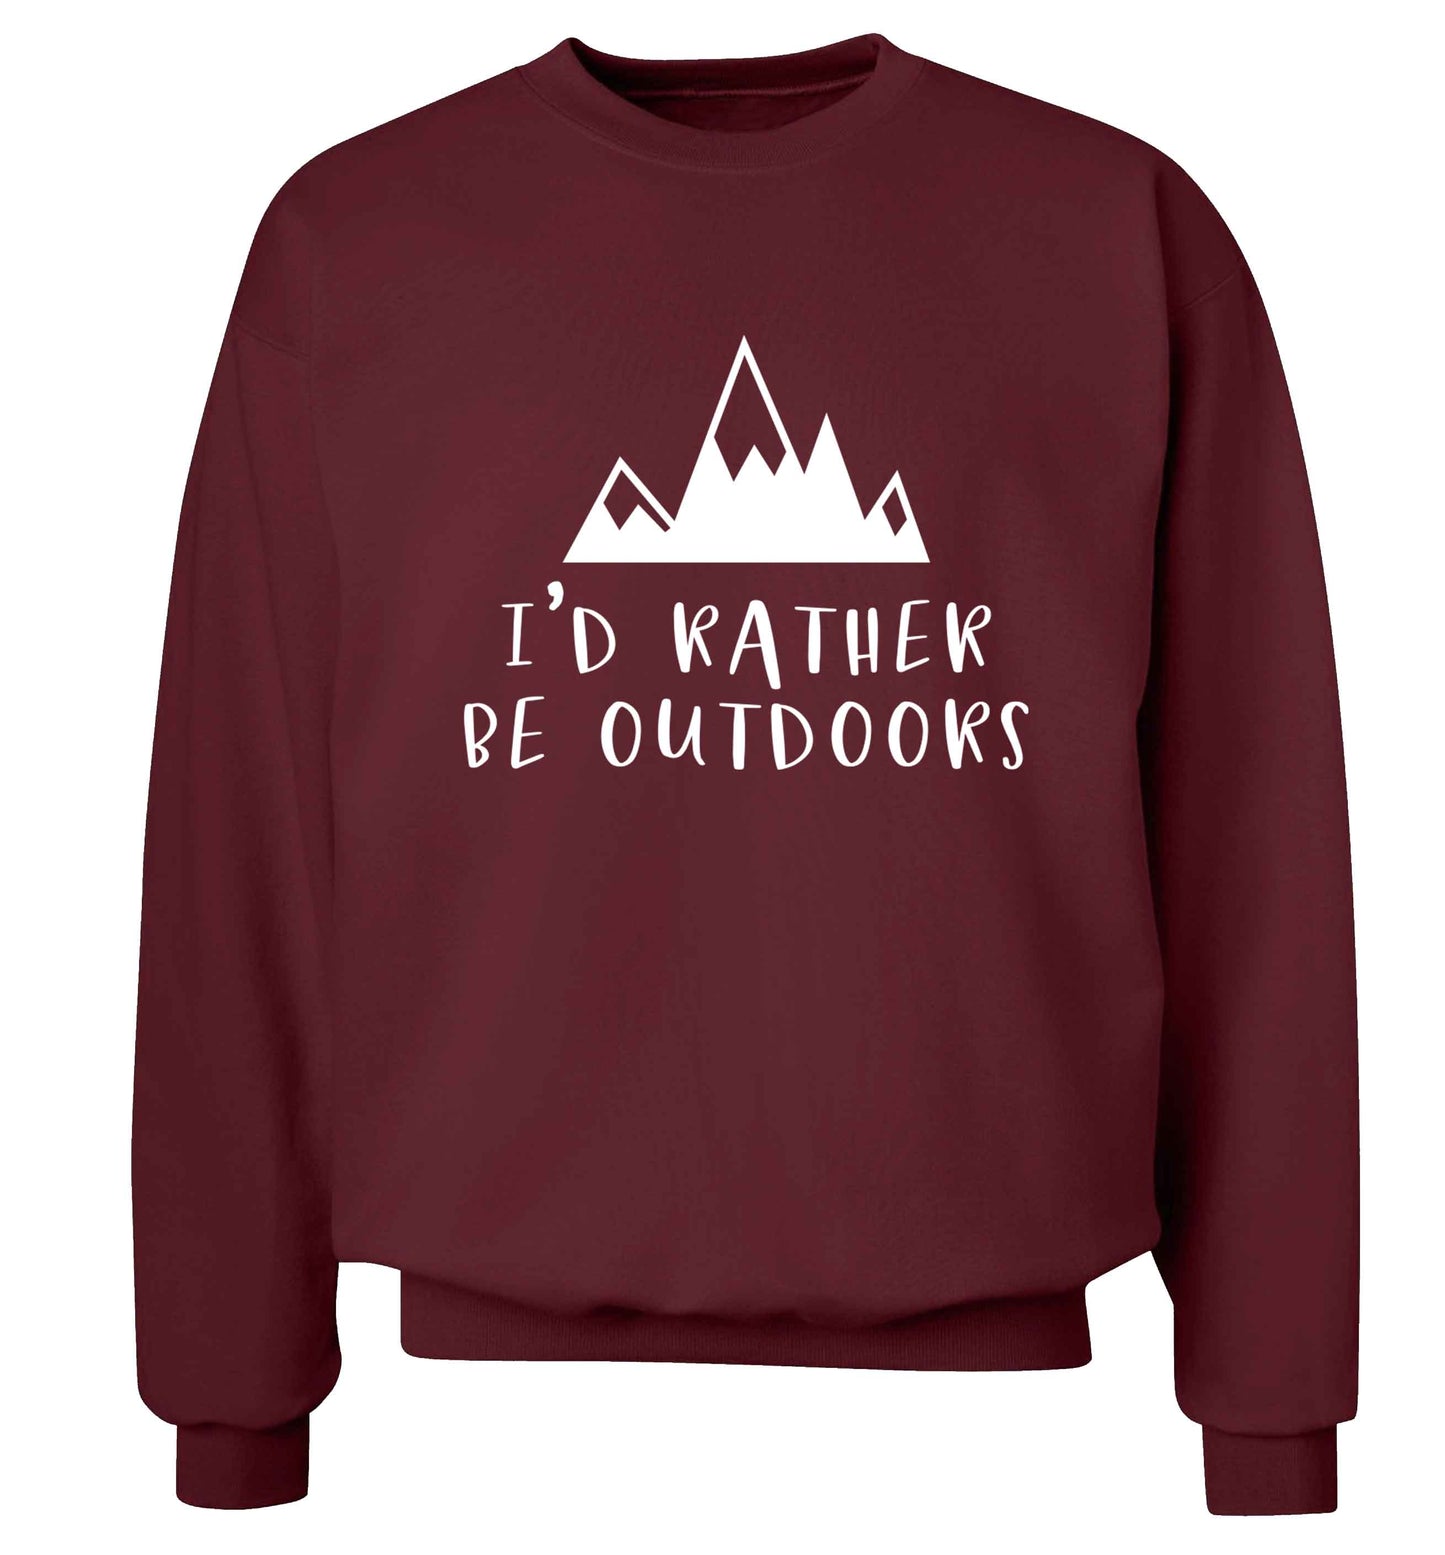 I'd rather be outdoors Adult's unisex maroon Sweater 2XL